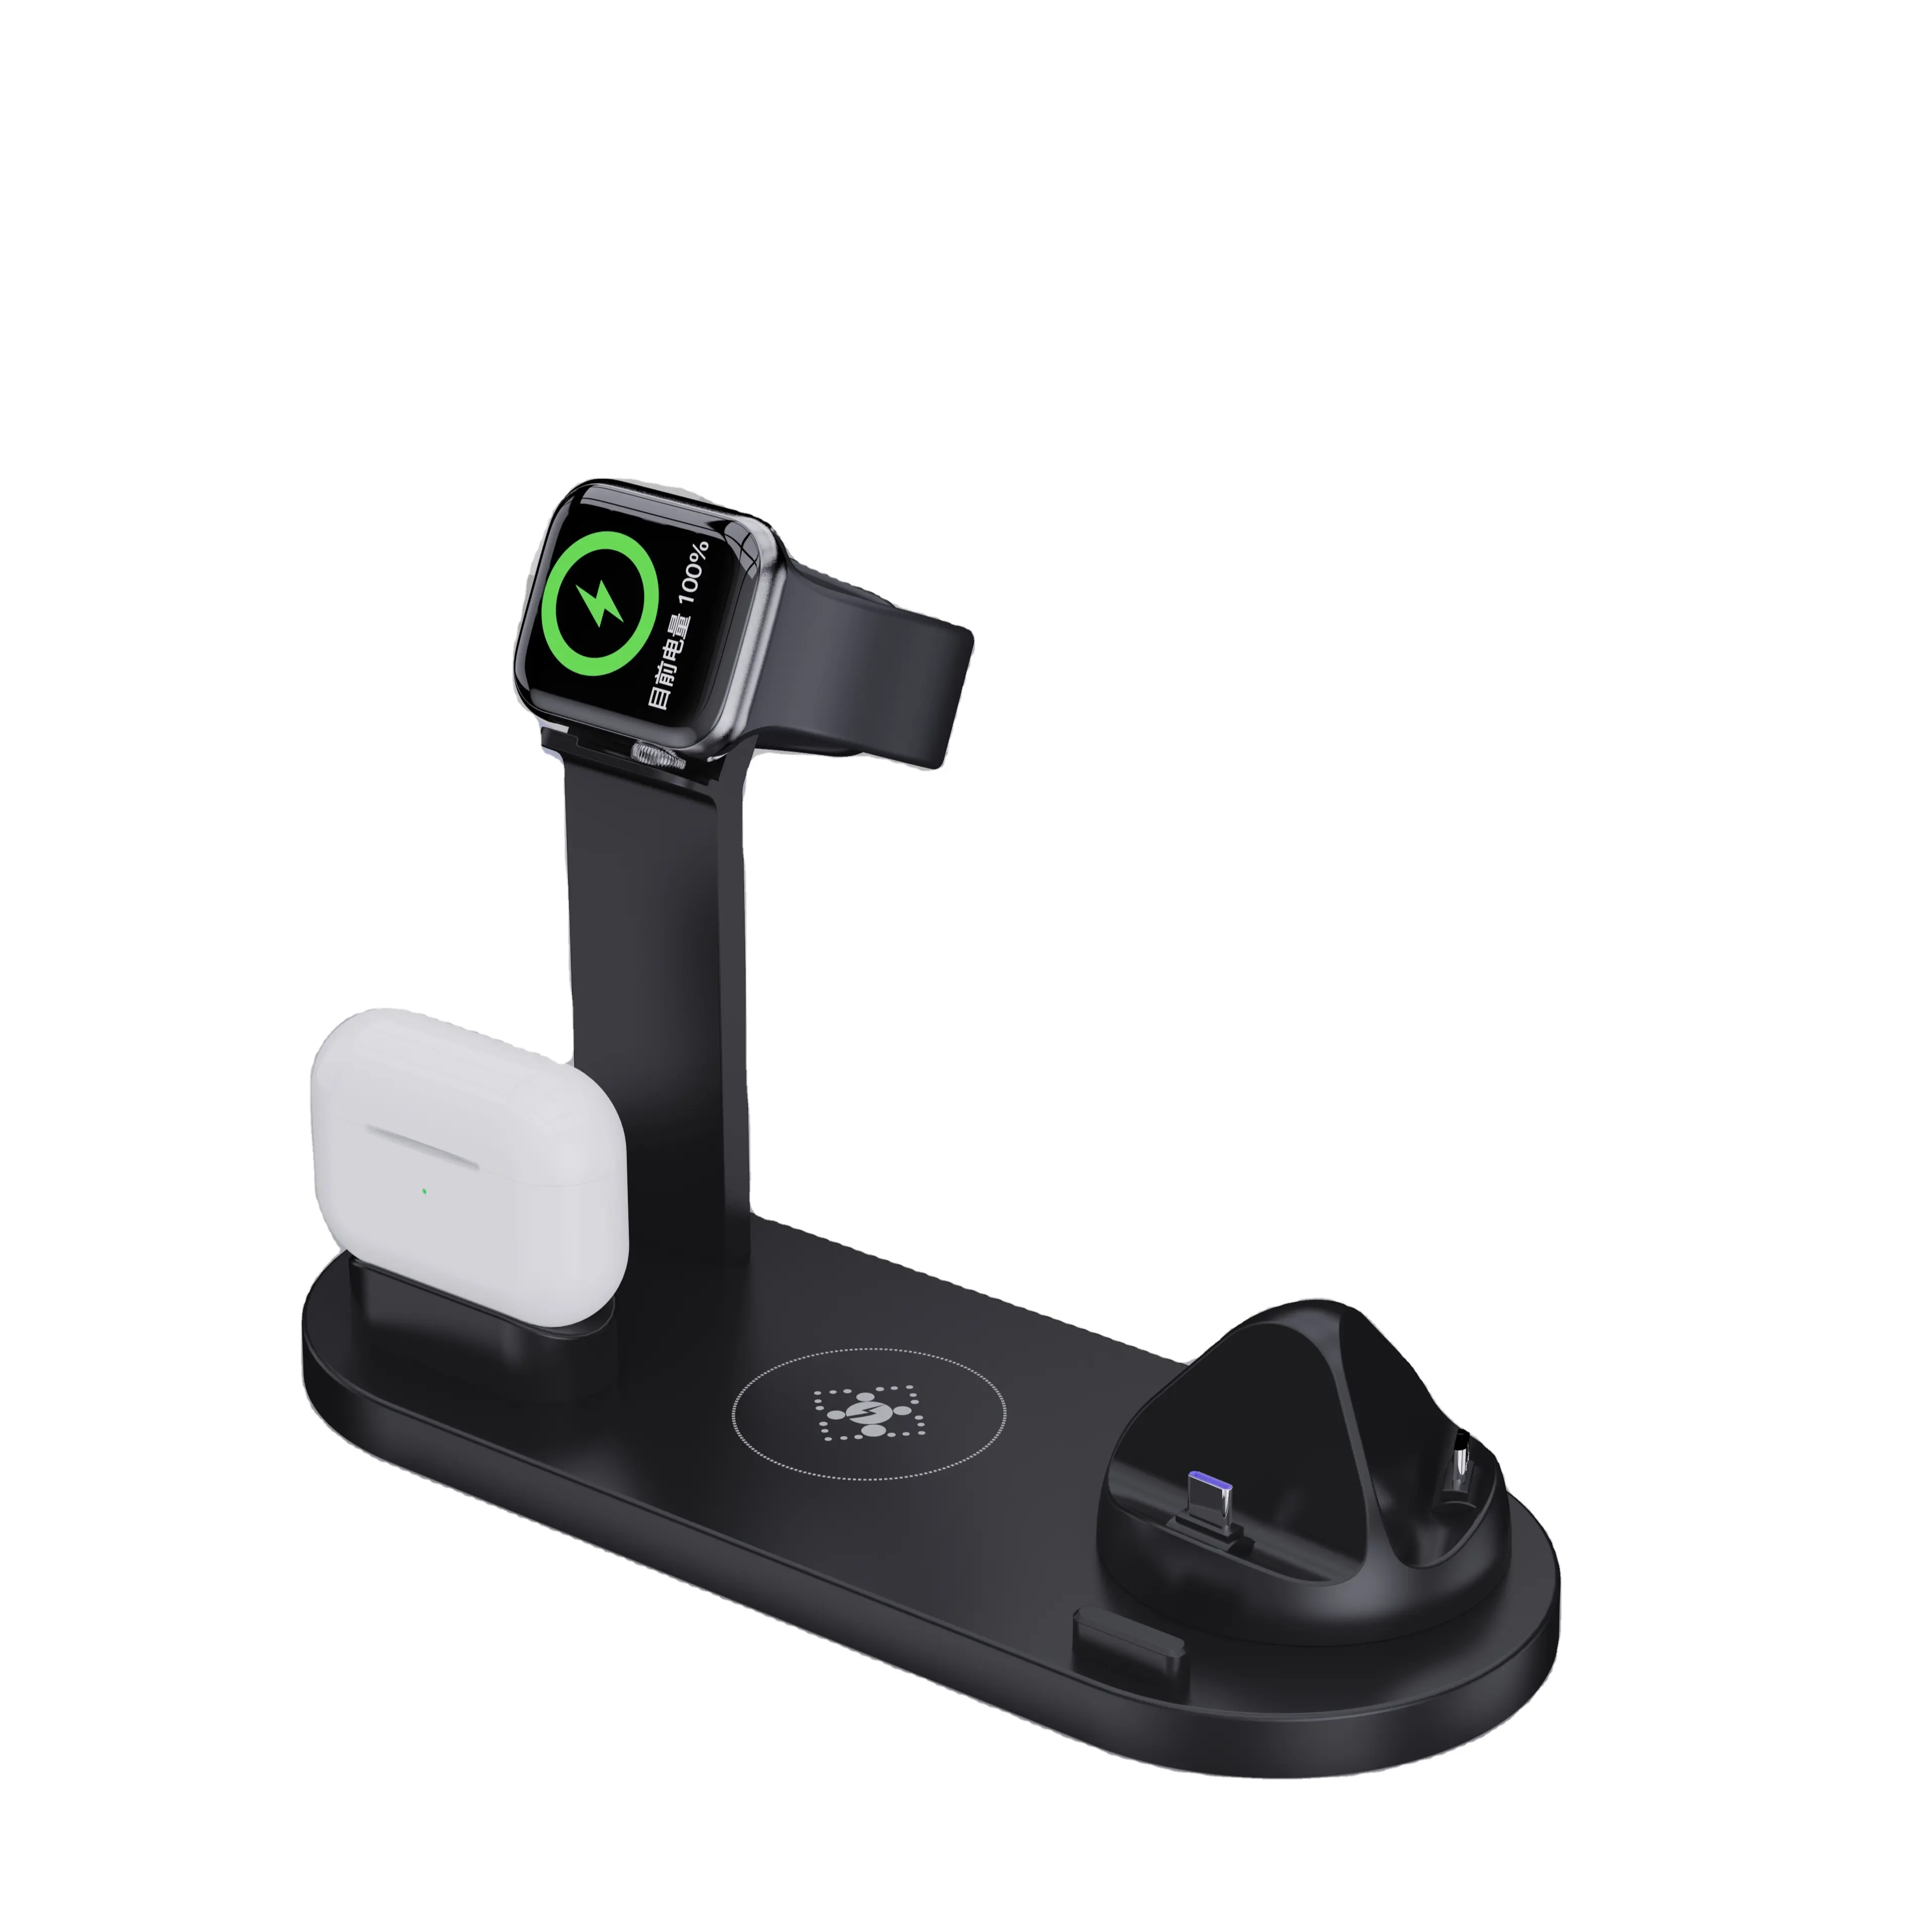 New arrival 6 in 1 Wireless Charging Station update Type-C socket customized Fast wireless Charging Stand Qi quick charge device